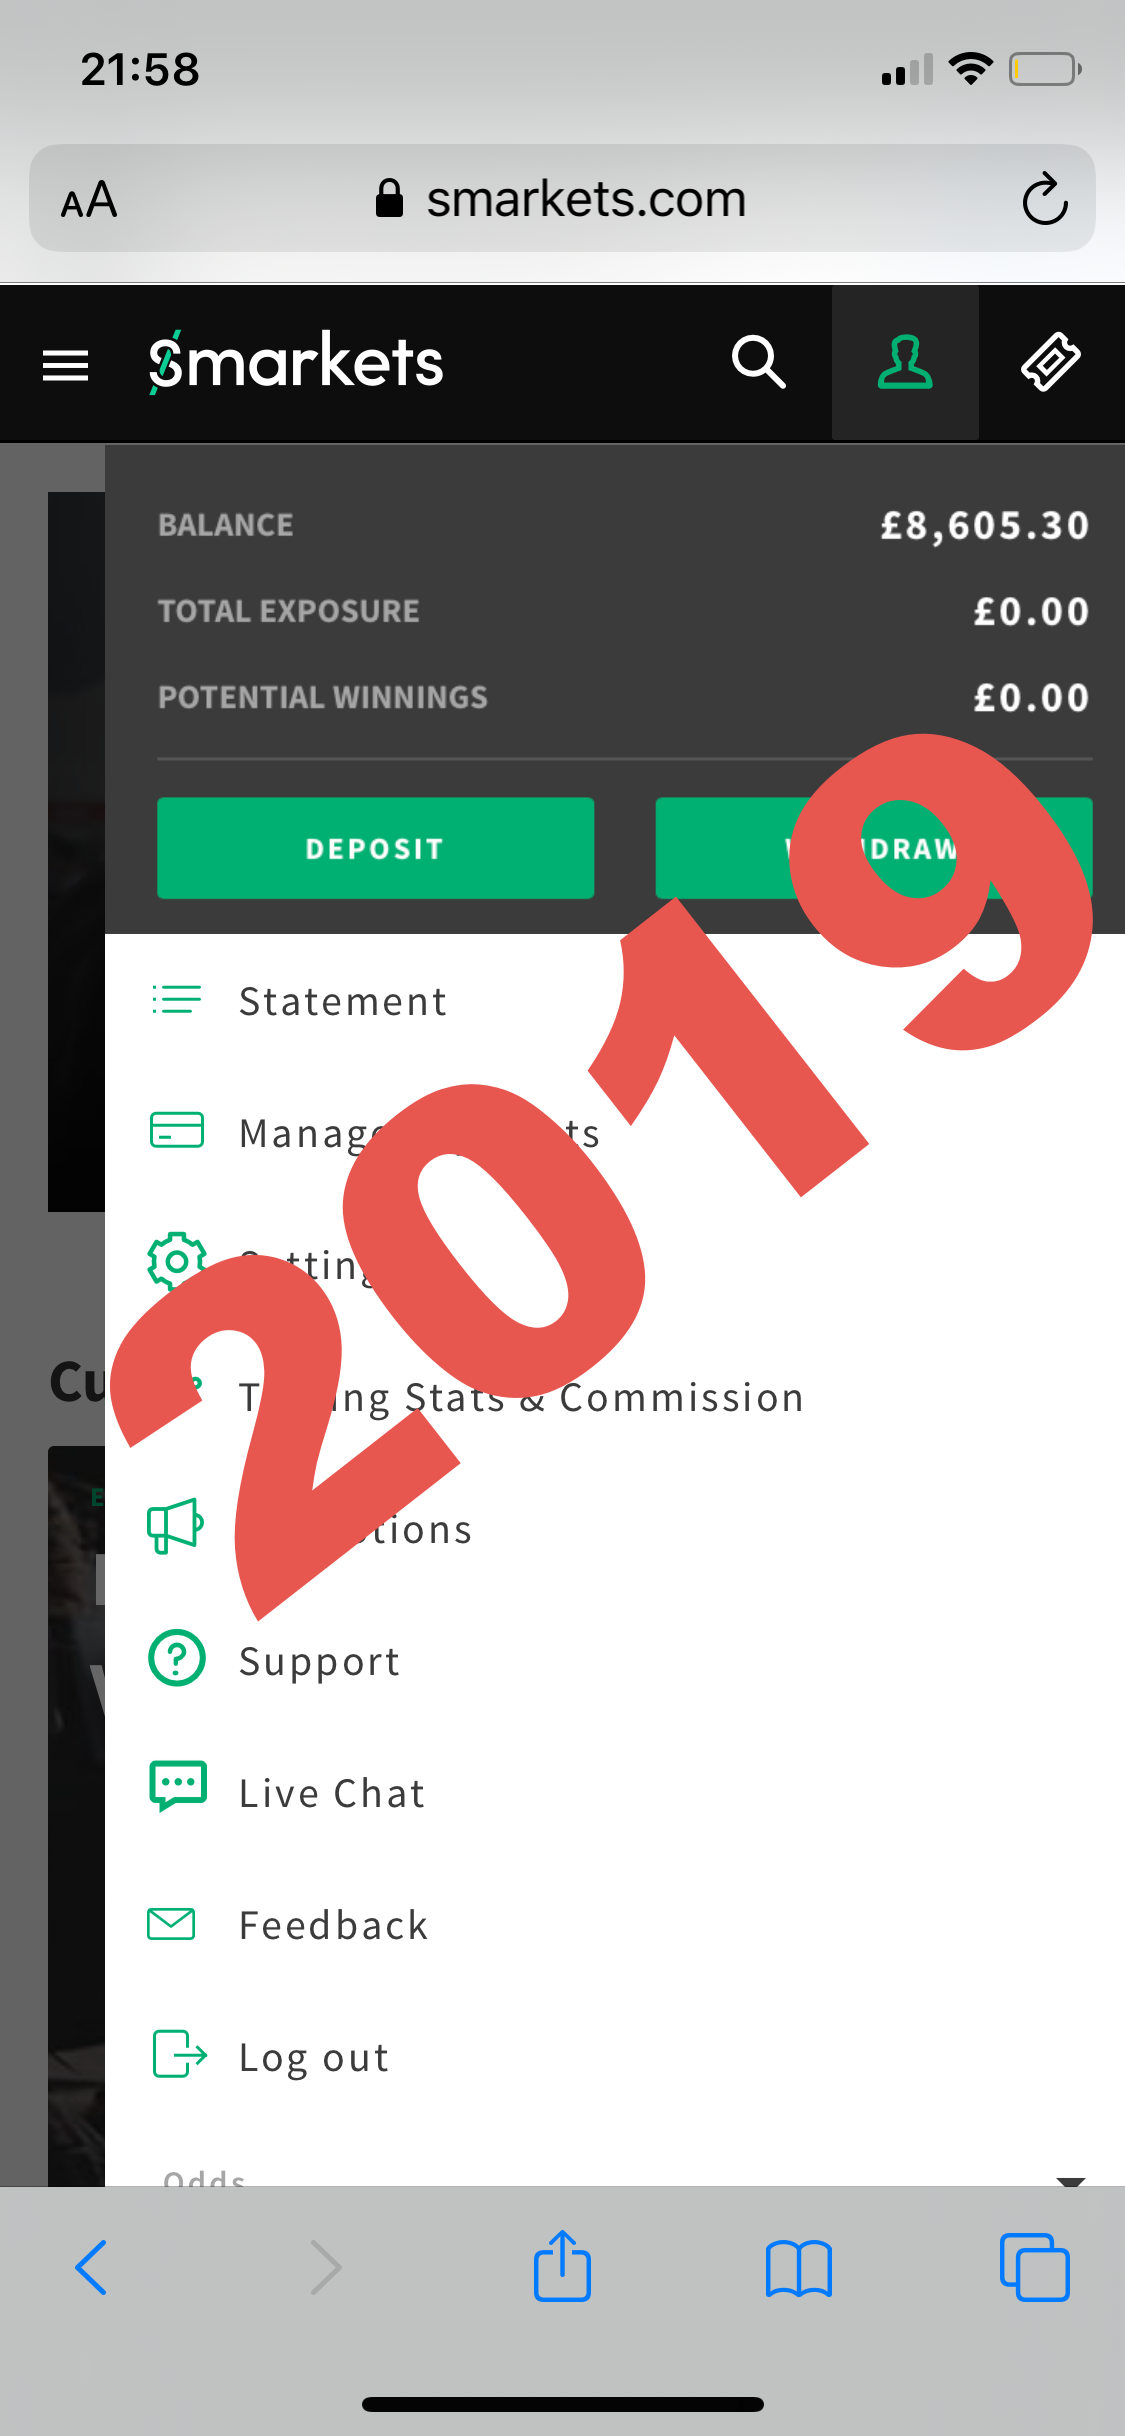 Screenshot of Smarkets balance using the horse lay betting system in 2019